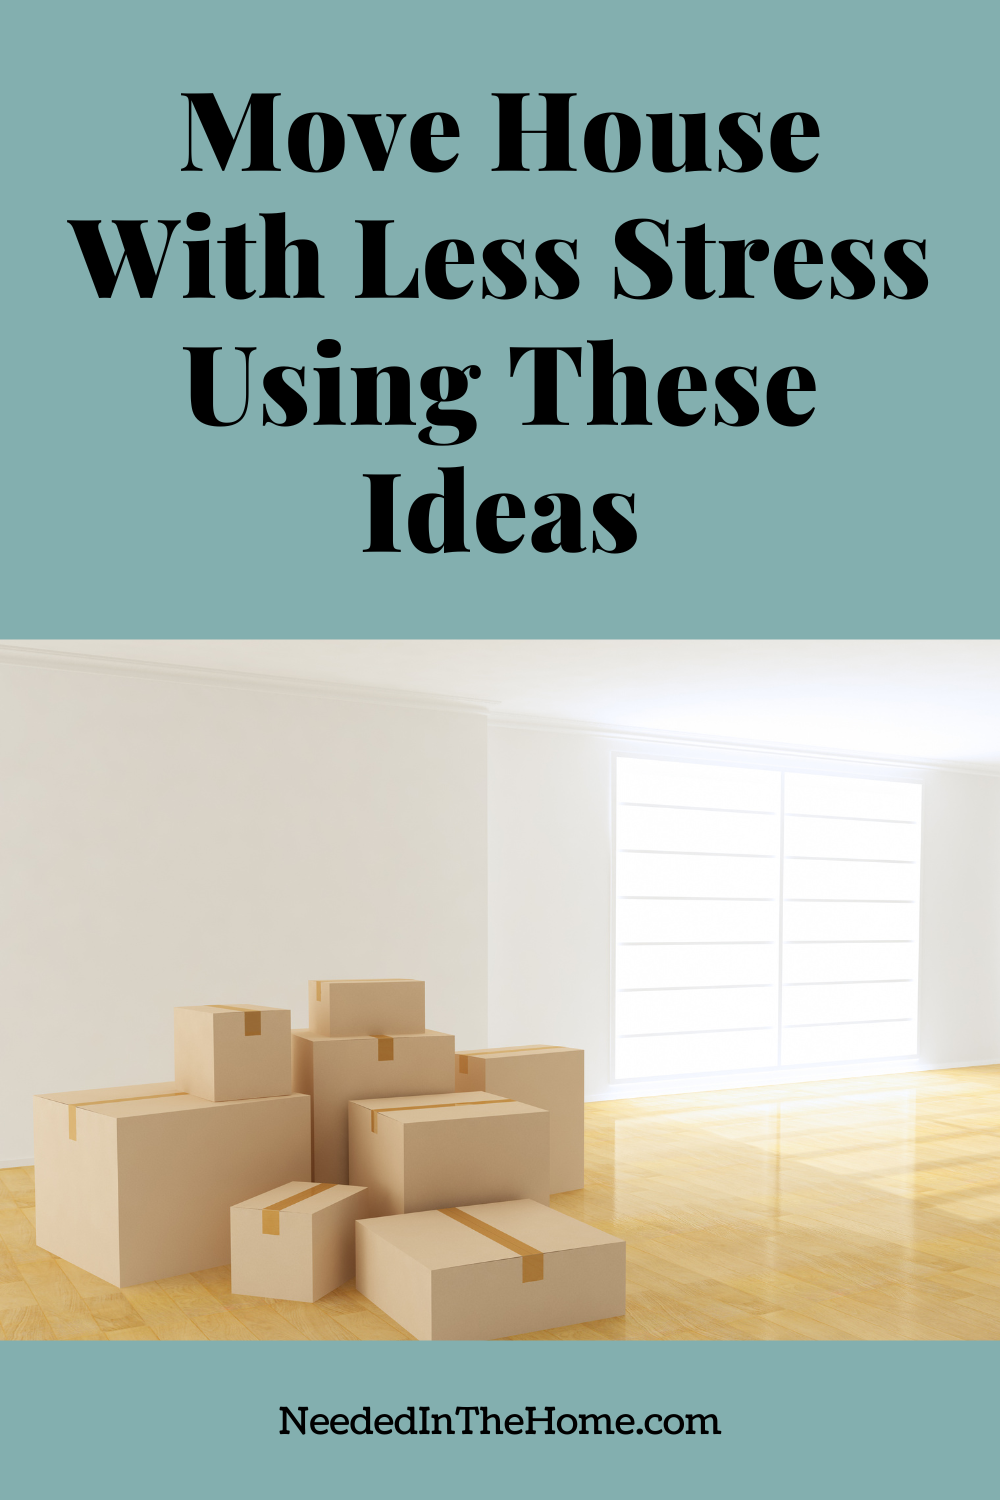 pinterest-pin-description move house with less stress using these ideas tape up cardboard boxes on the floor with bright window to the right and behind neededinthehome